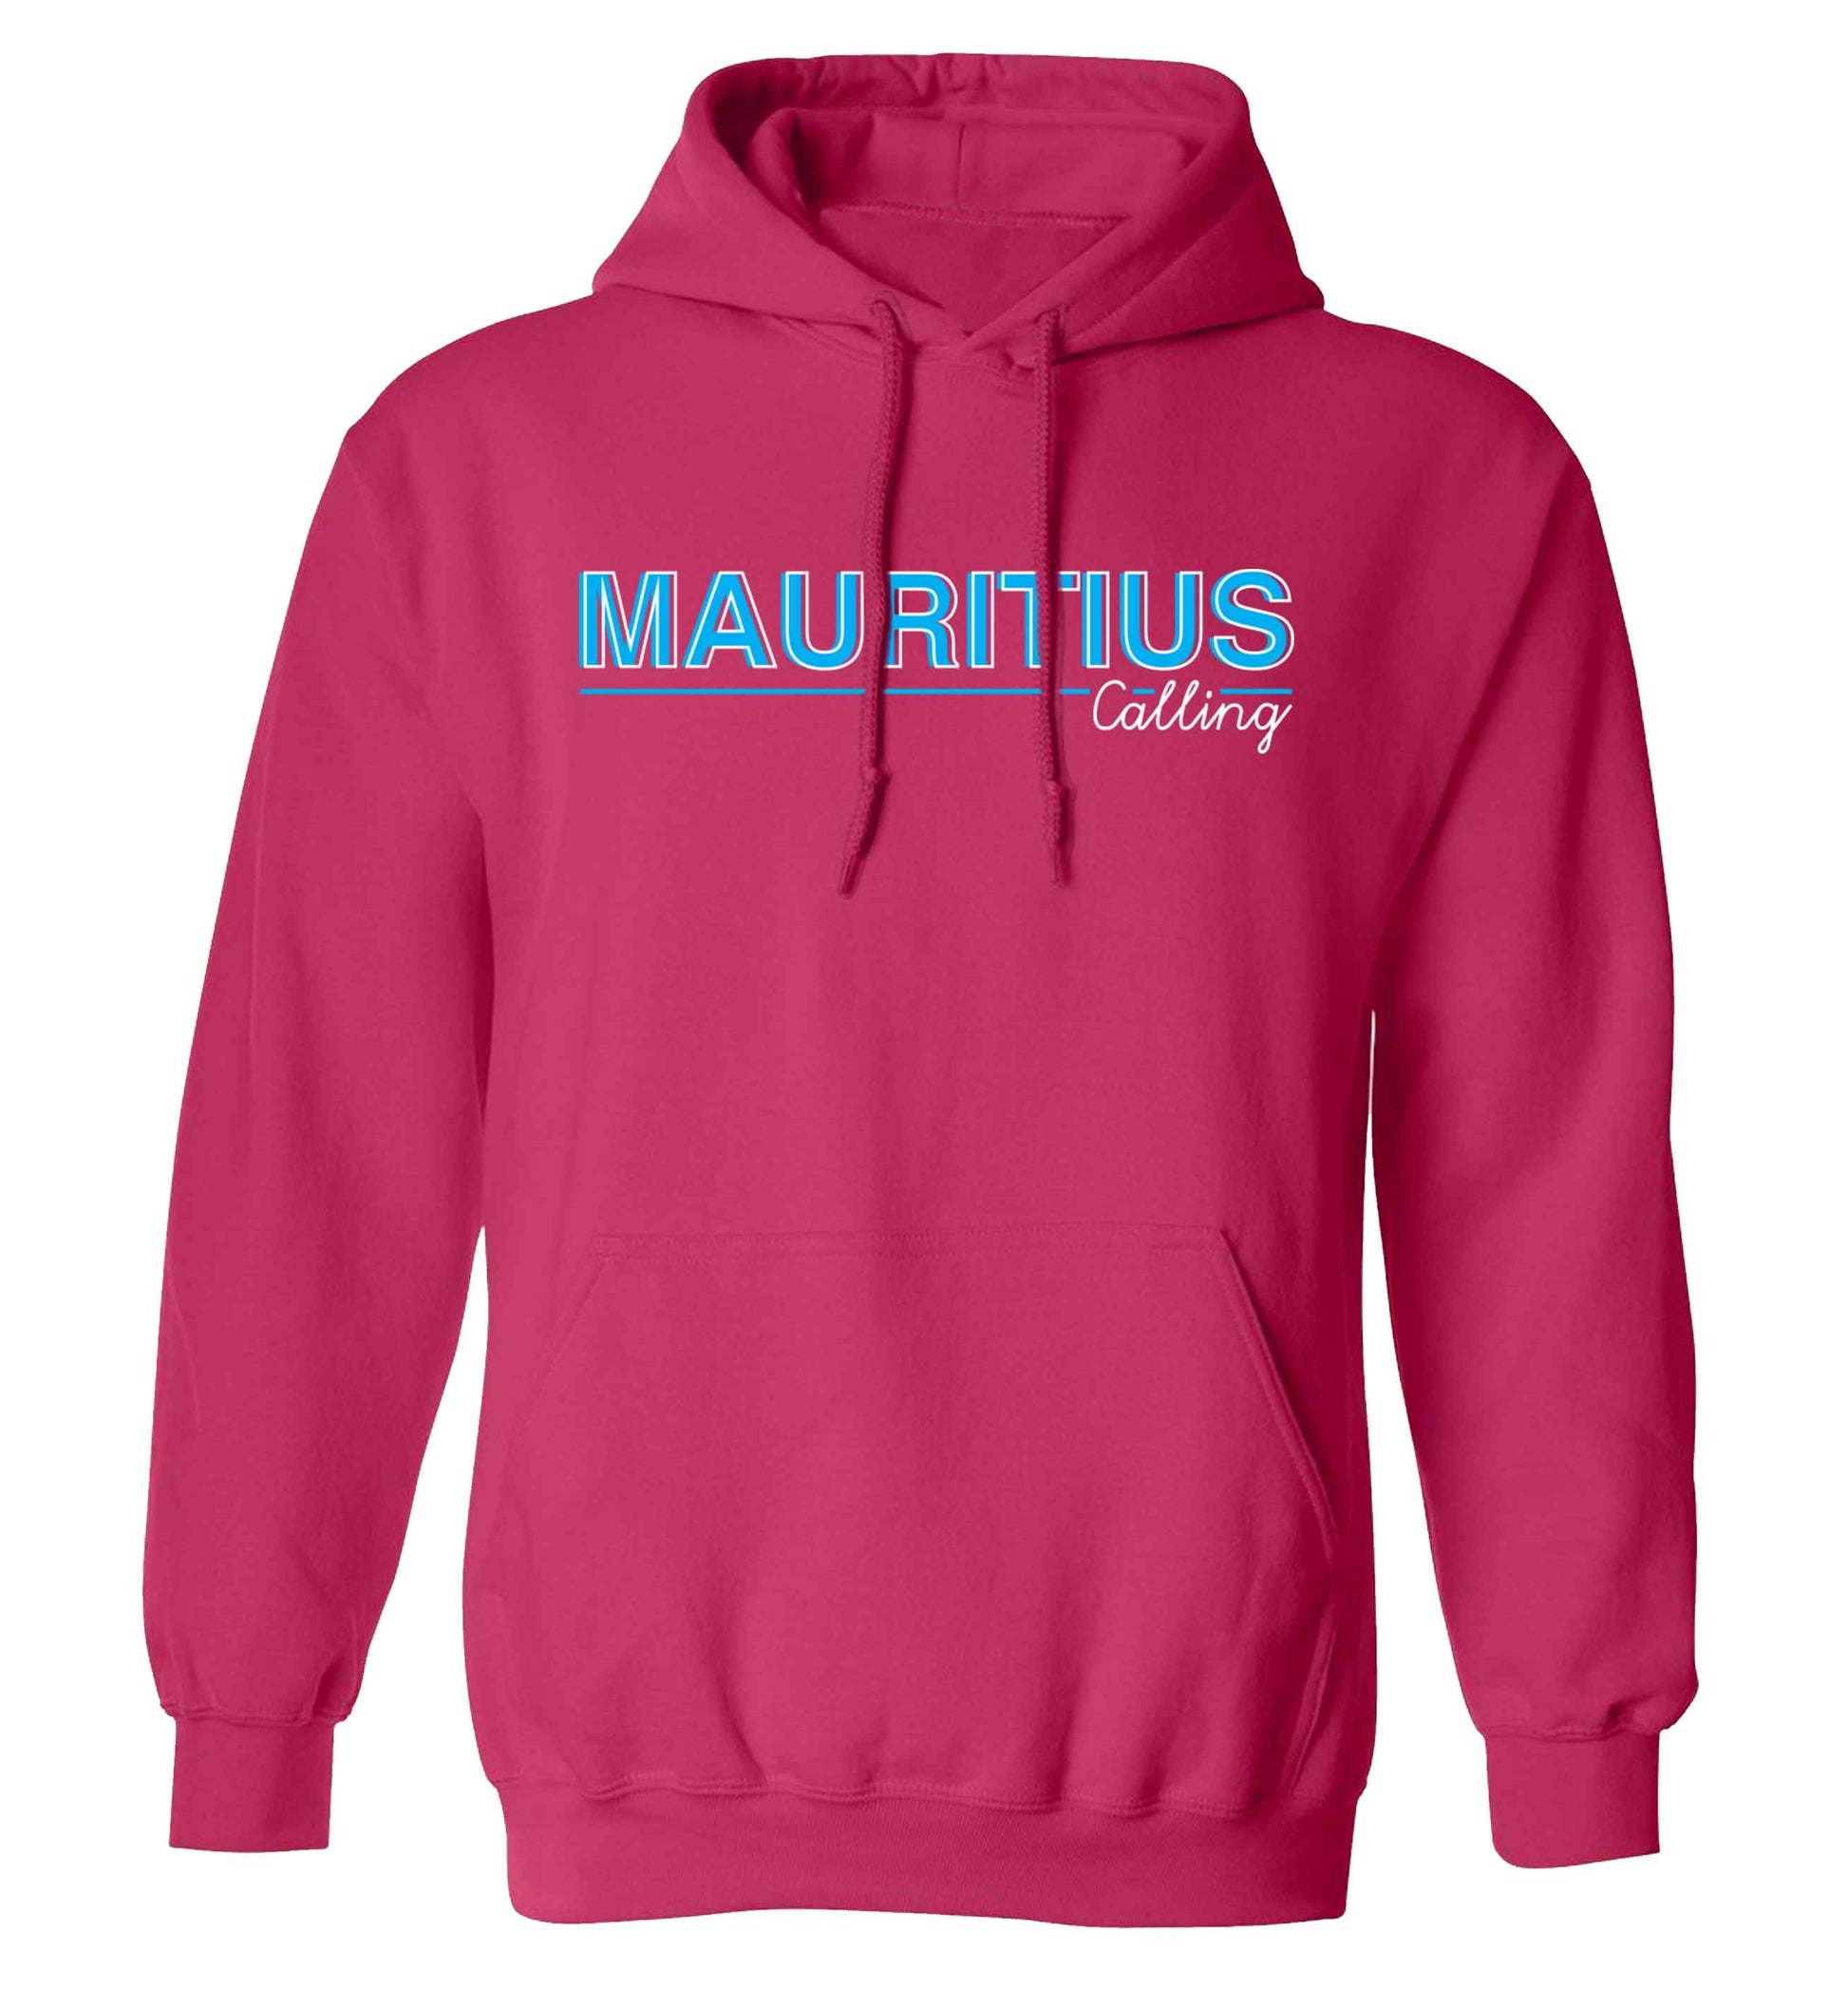 Mauritius calling adults unisex pink hoodie 2XL